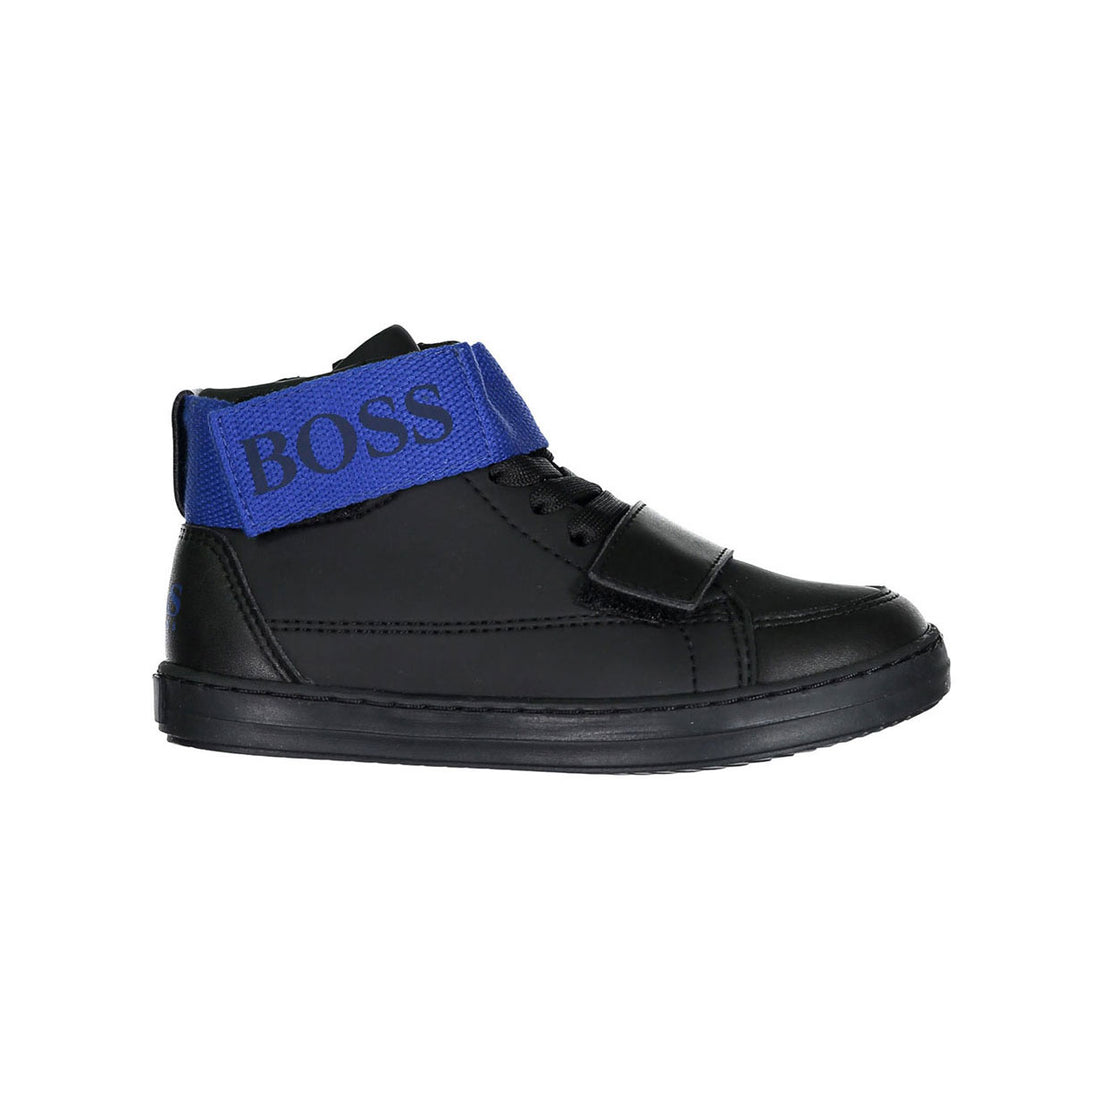 Hugo Boss Black Midcut Lace Tie Sneakers With Blue Scratch Closure